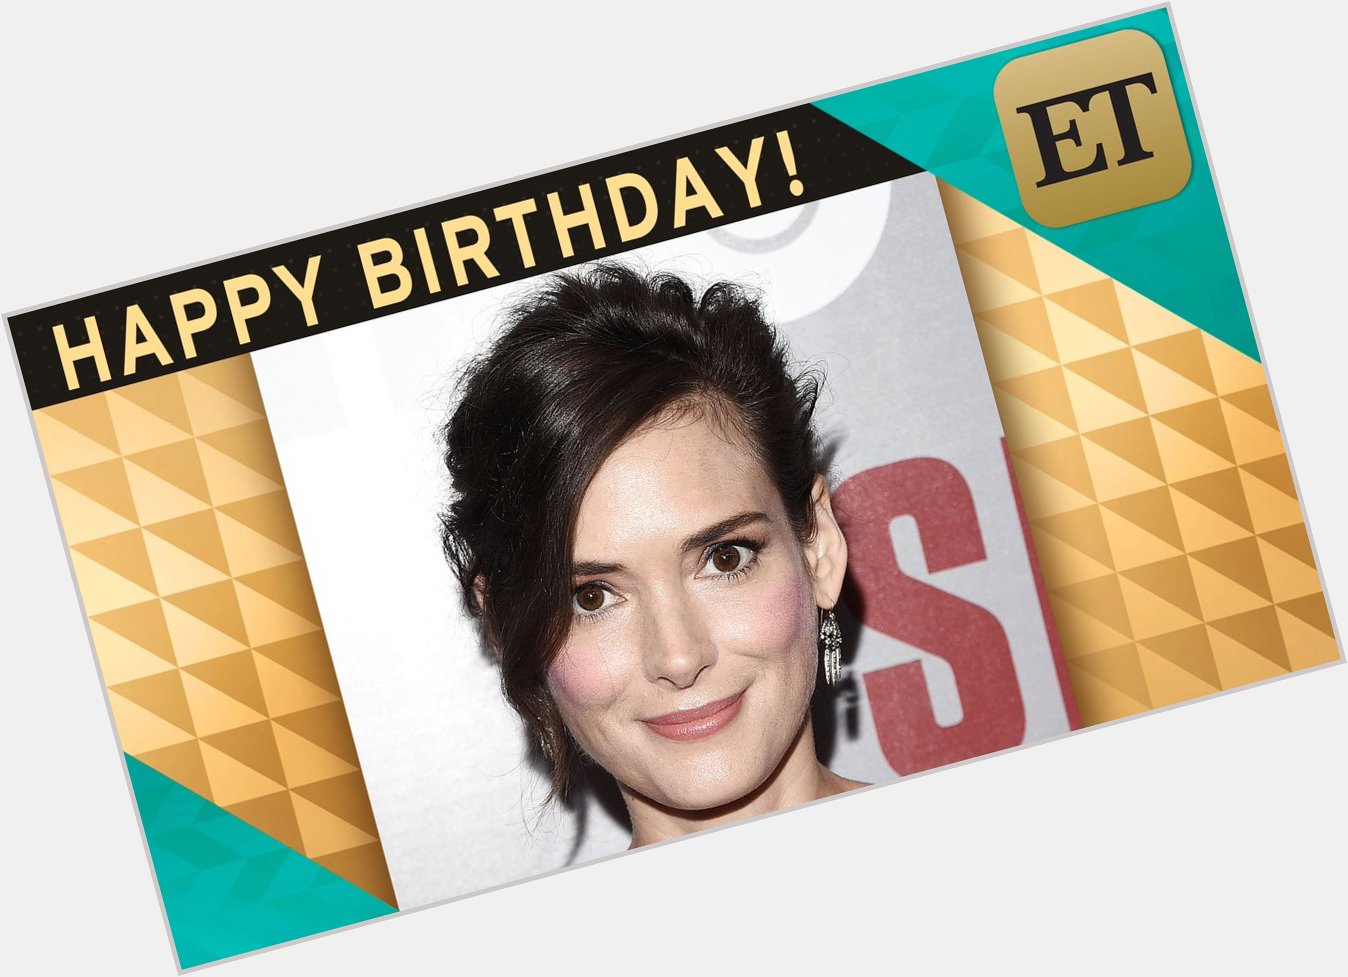 Happy birthday, Winona Ryder! She told ET all about embracing getting older: 